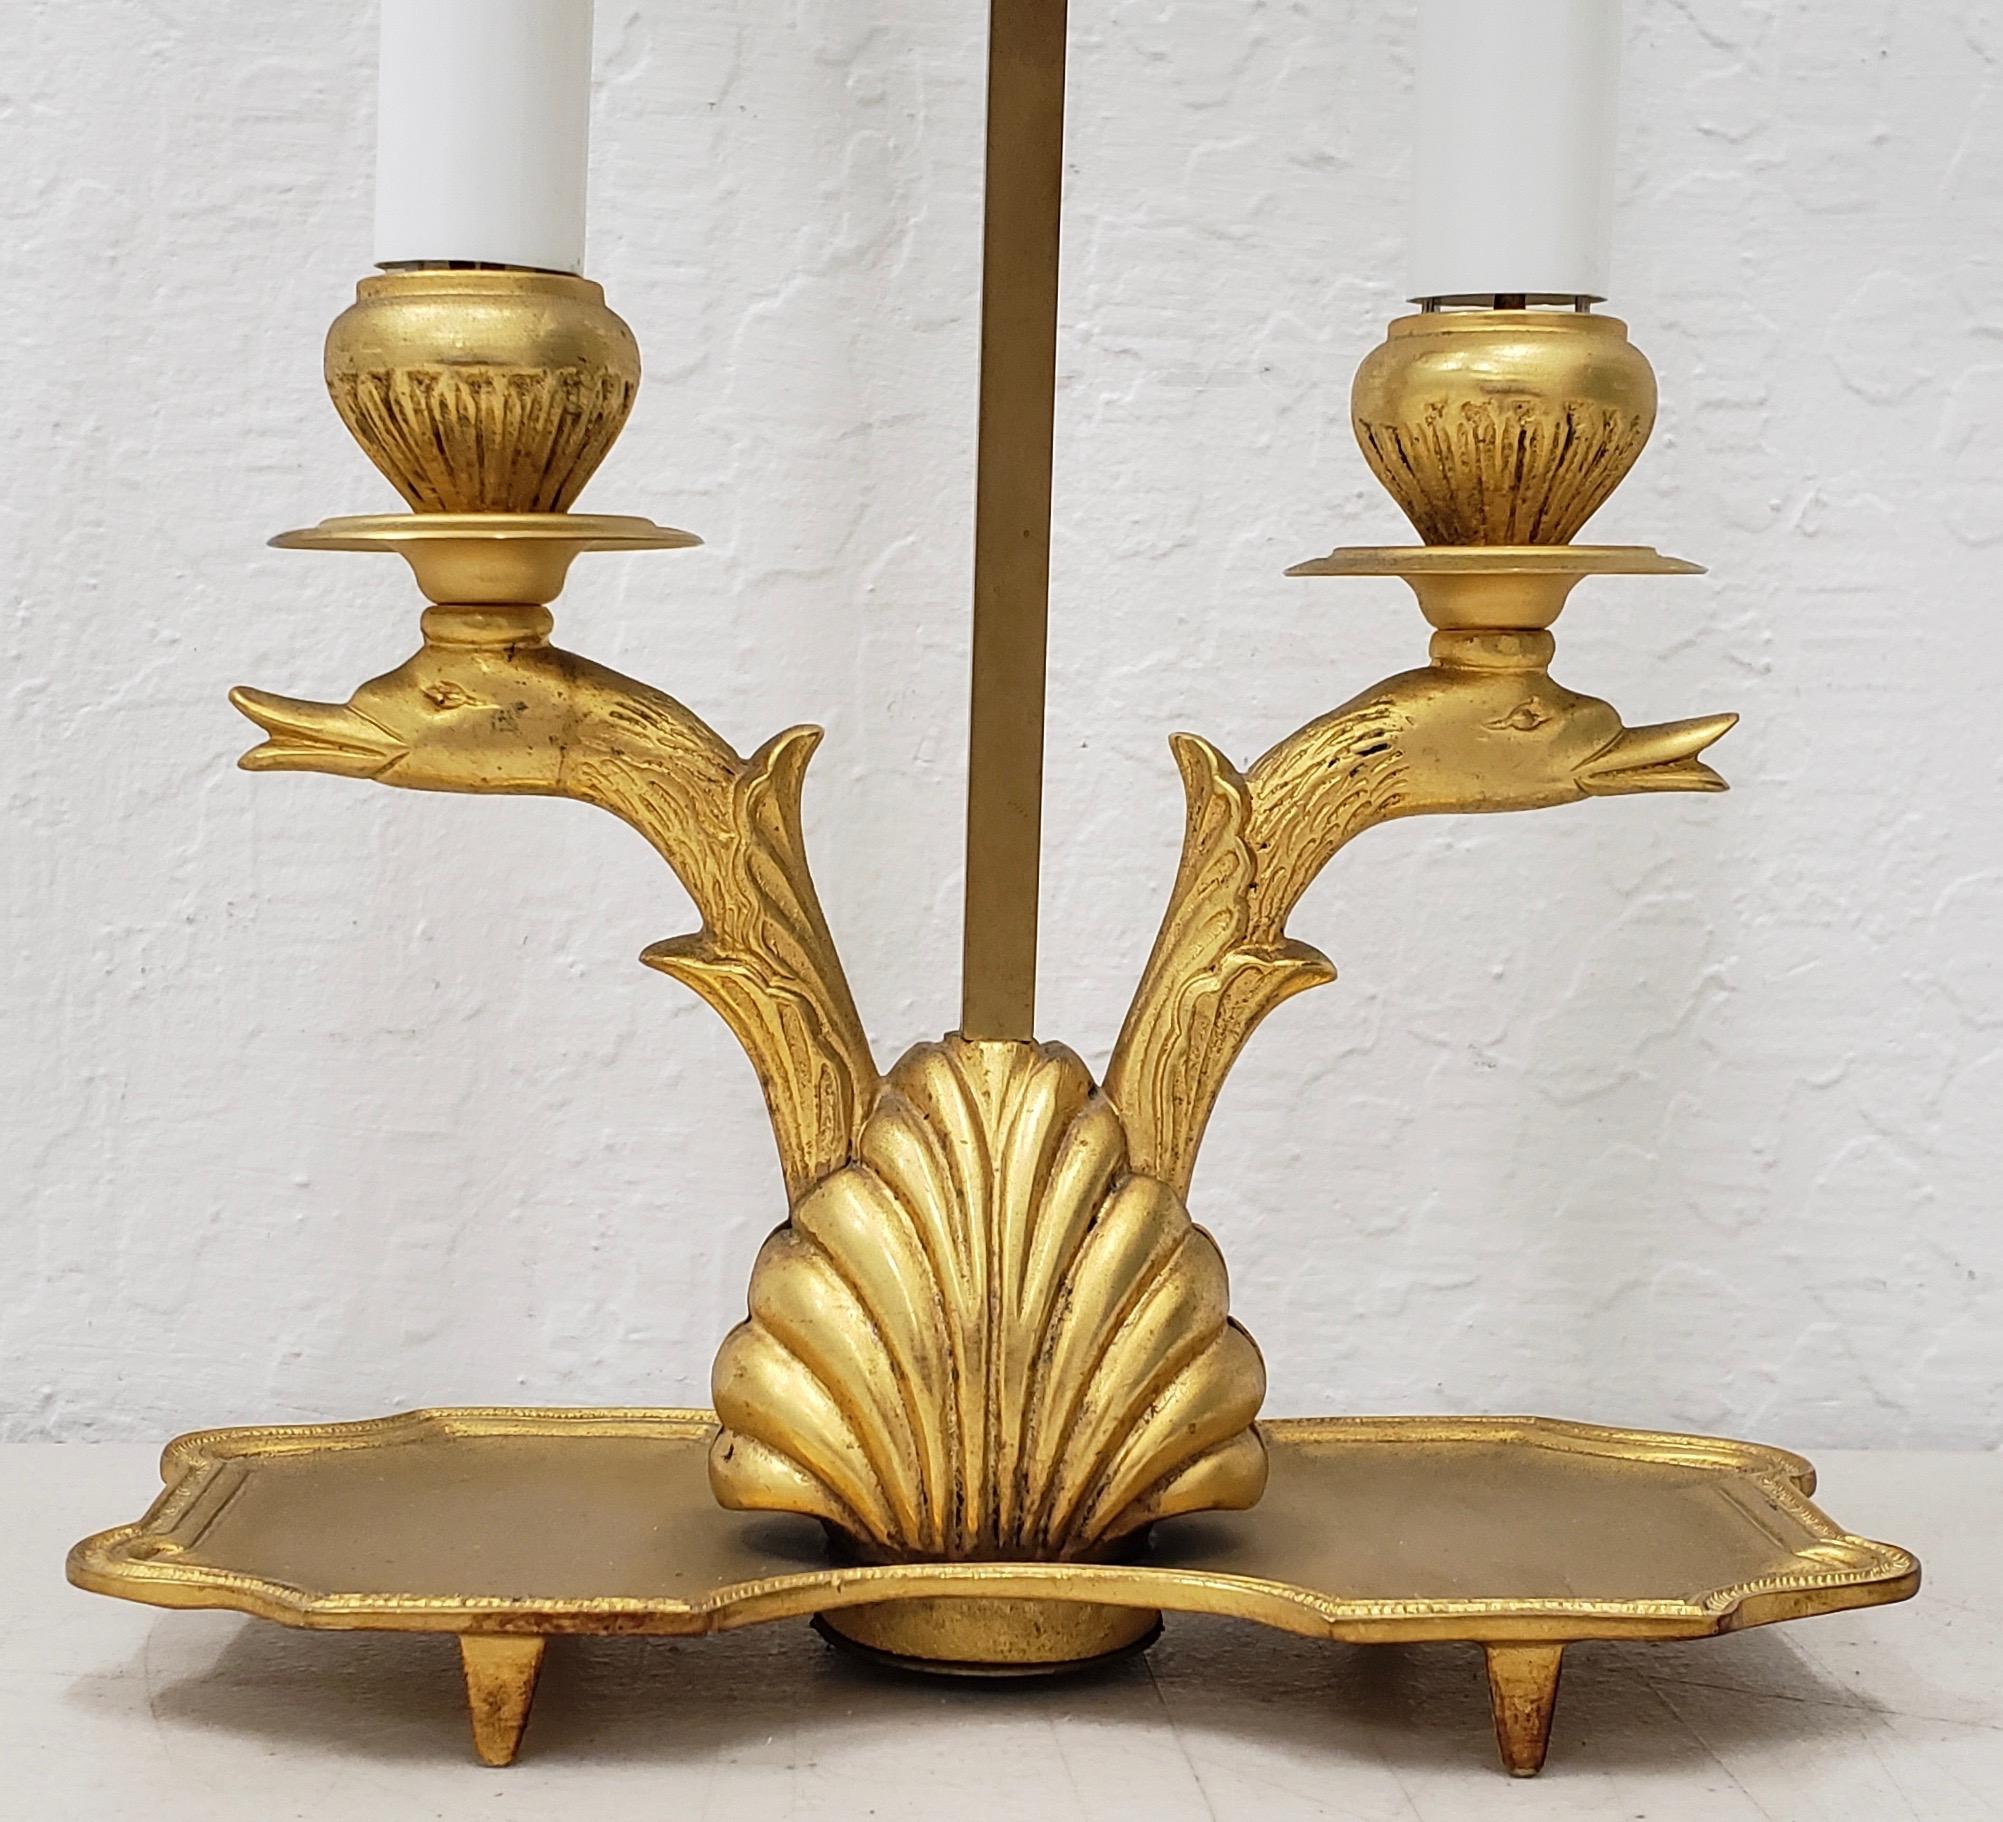 Early 20th century French Bouillotte gilt bronze and tole table lamp

Dimensions 8